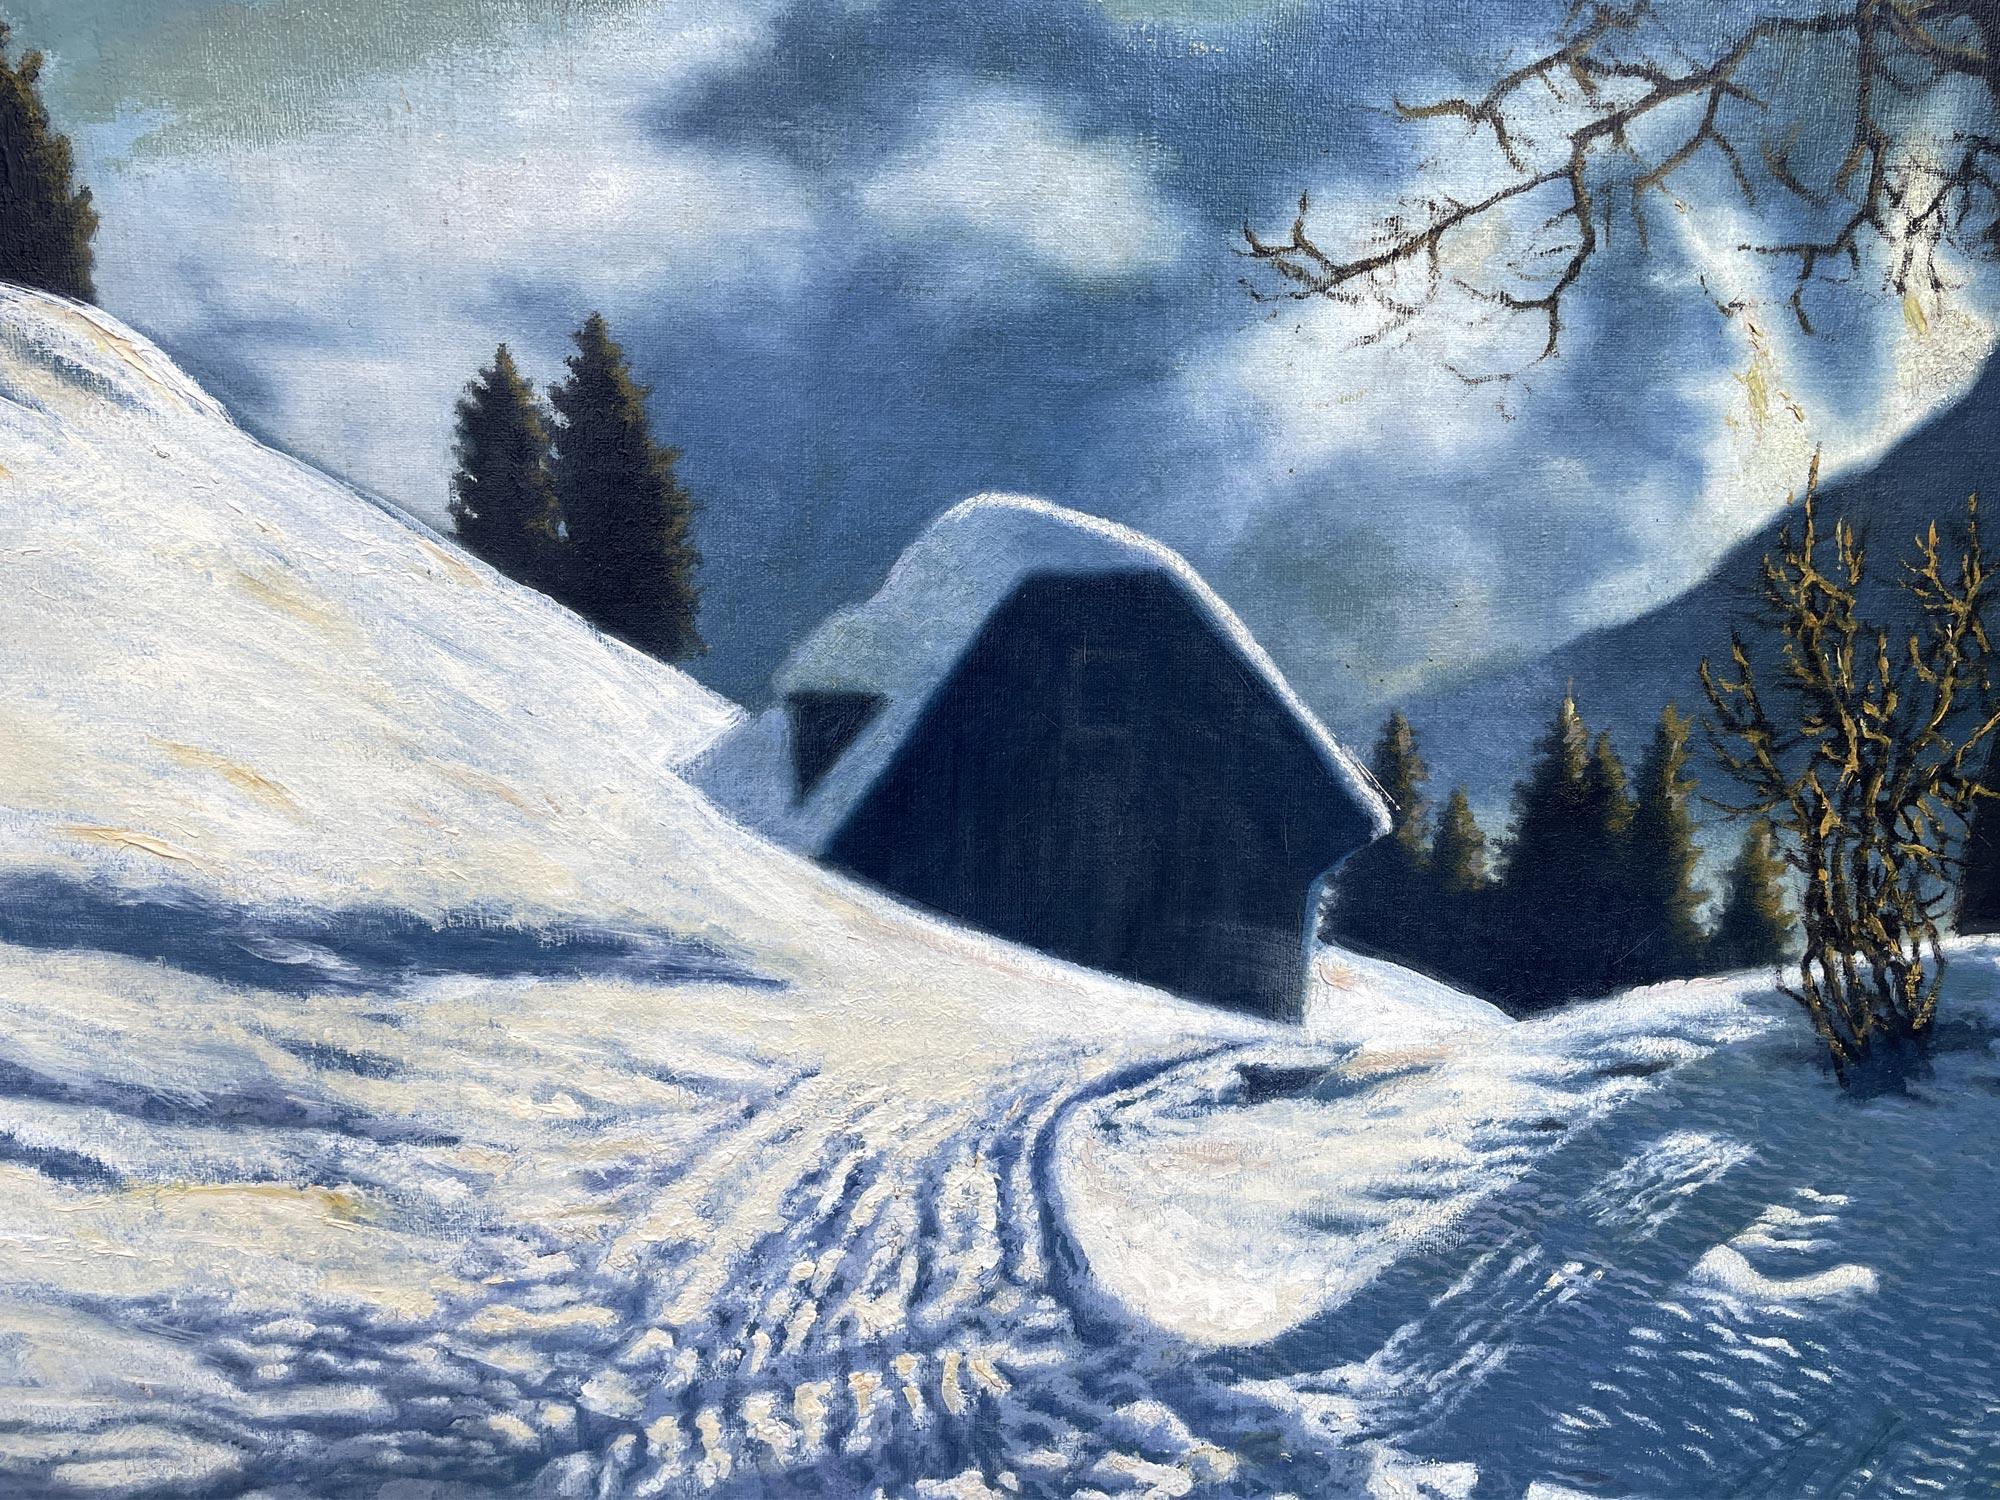 Albert Gruber, Hut in the Snowy Forest Oil on Canvas, 1940 7